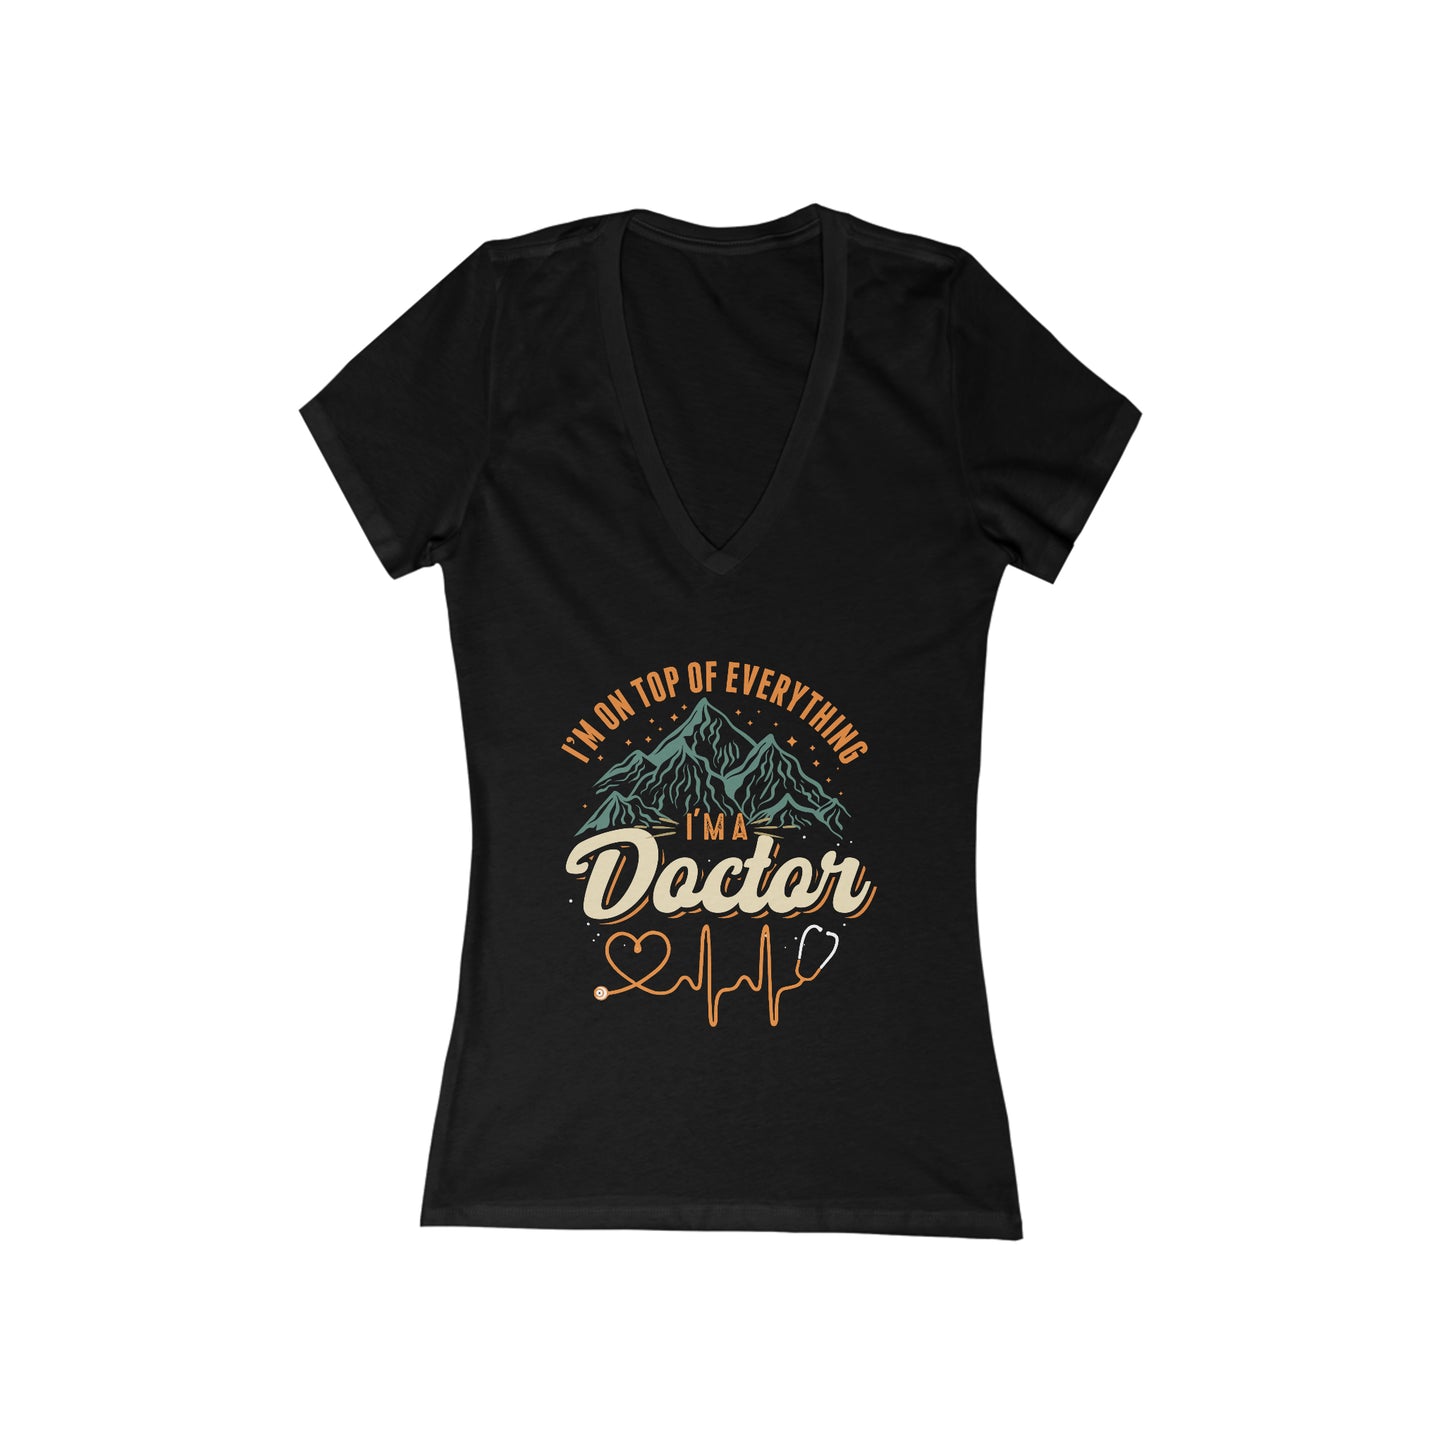 I'm on Top of Everything Women's Short Sleeve V-Neck Tee, Doctor shirts, Doctor gift ideas, gift for doctors, women shirt with doctor design